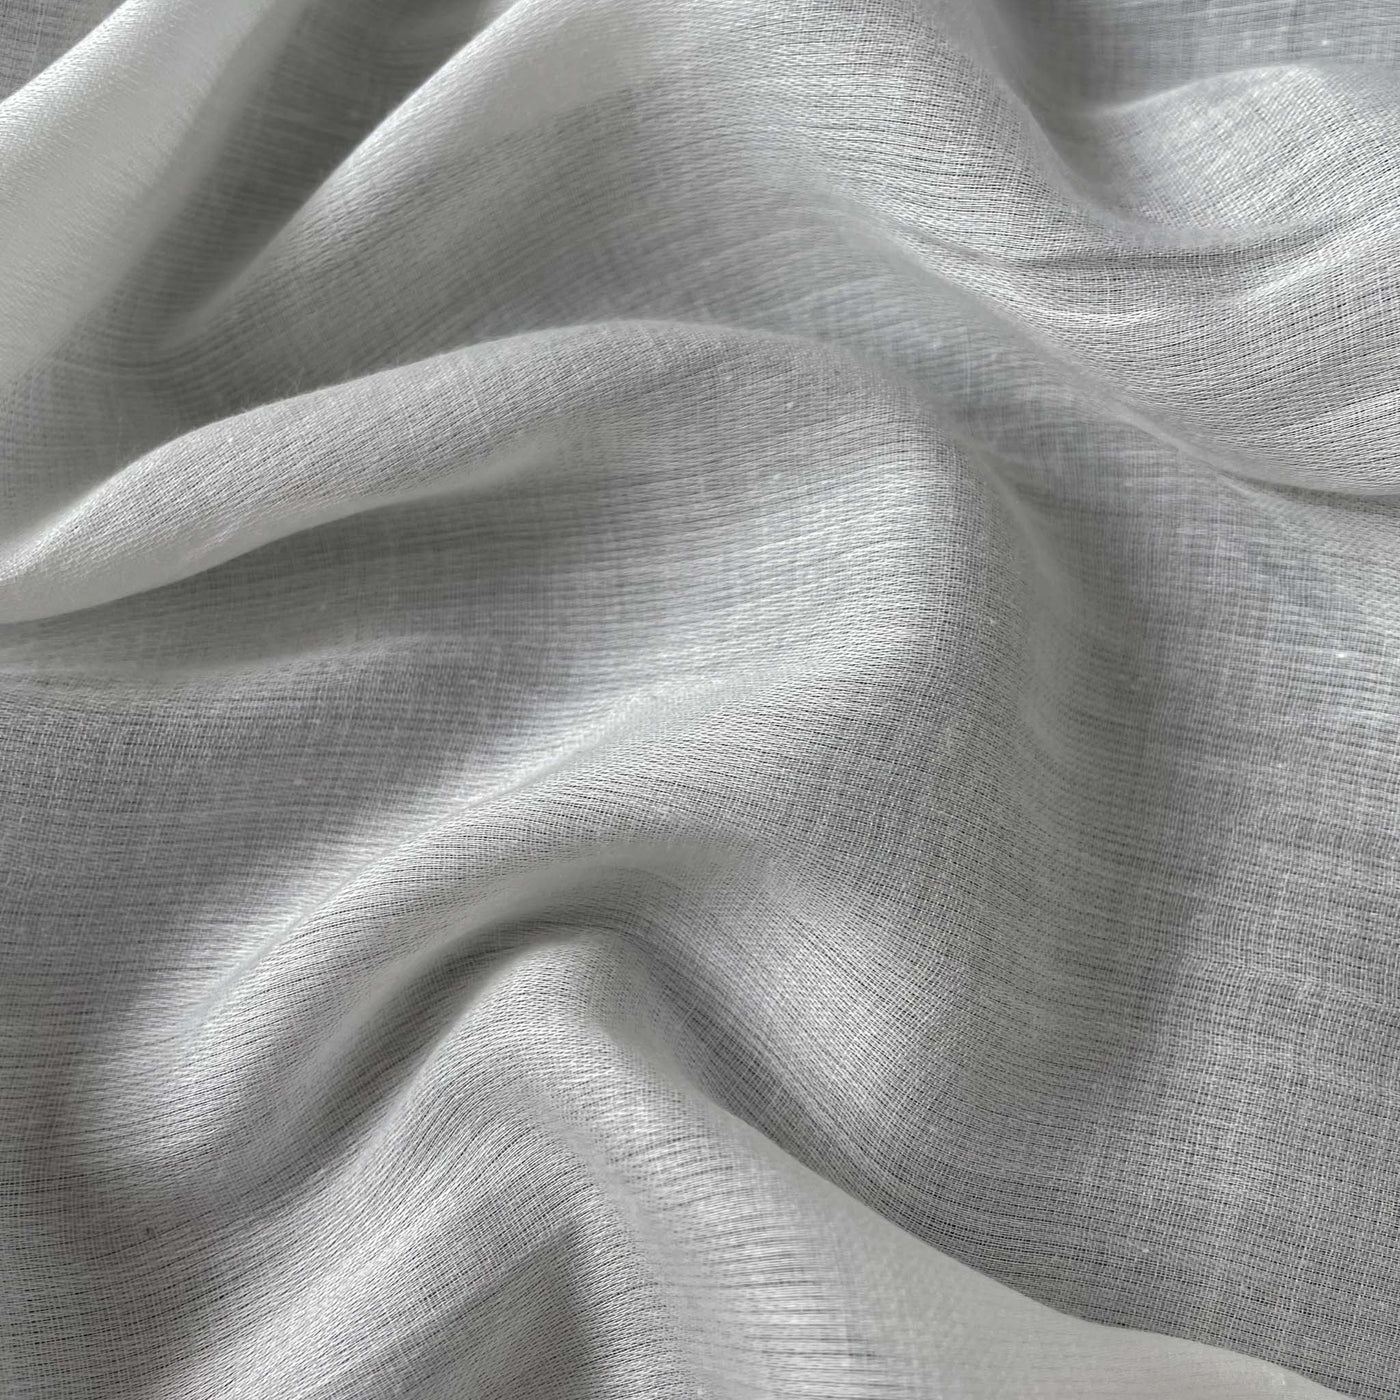 Fabric Pandit Fabric White Dyeable Pure Lawn Cotton Satin Plain Fabric (Width 44 Inches, 62 gms)